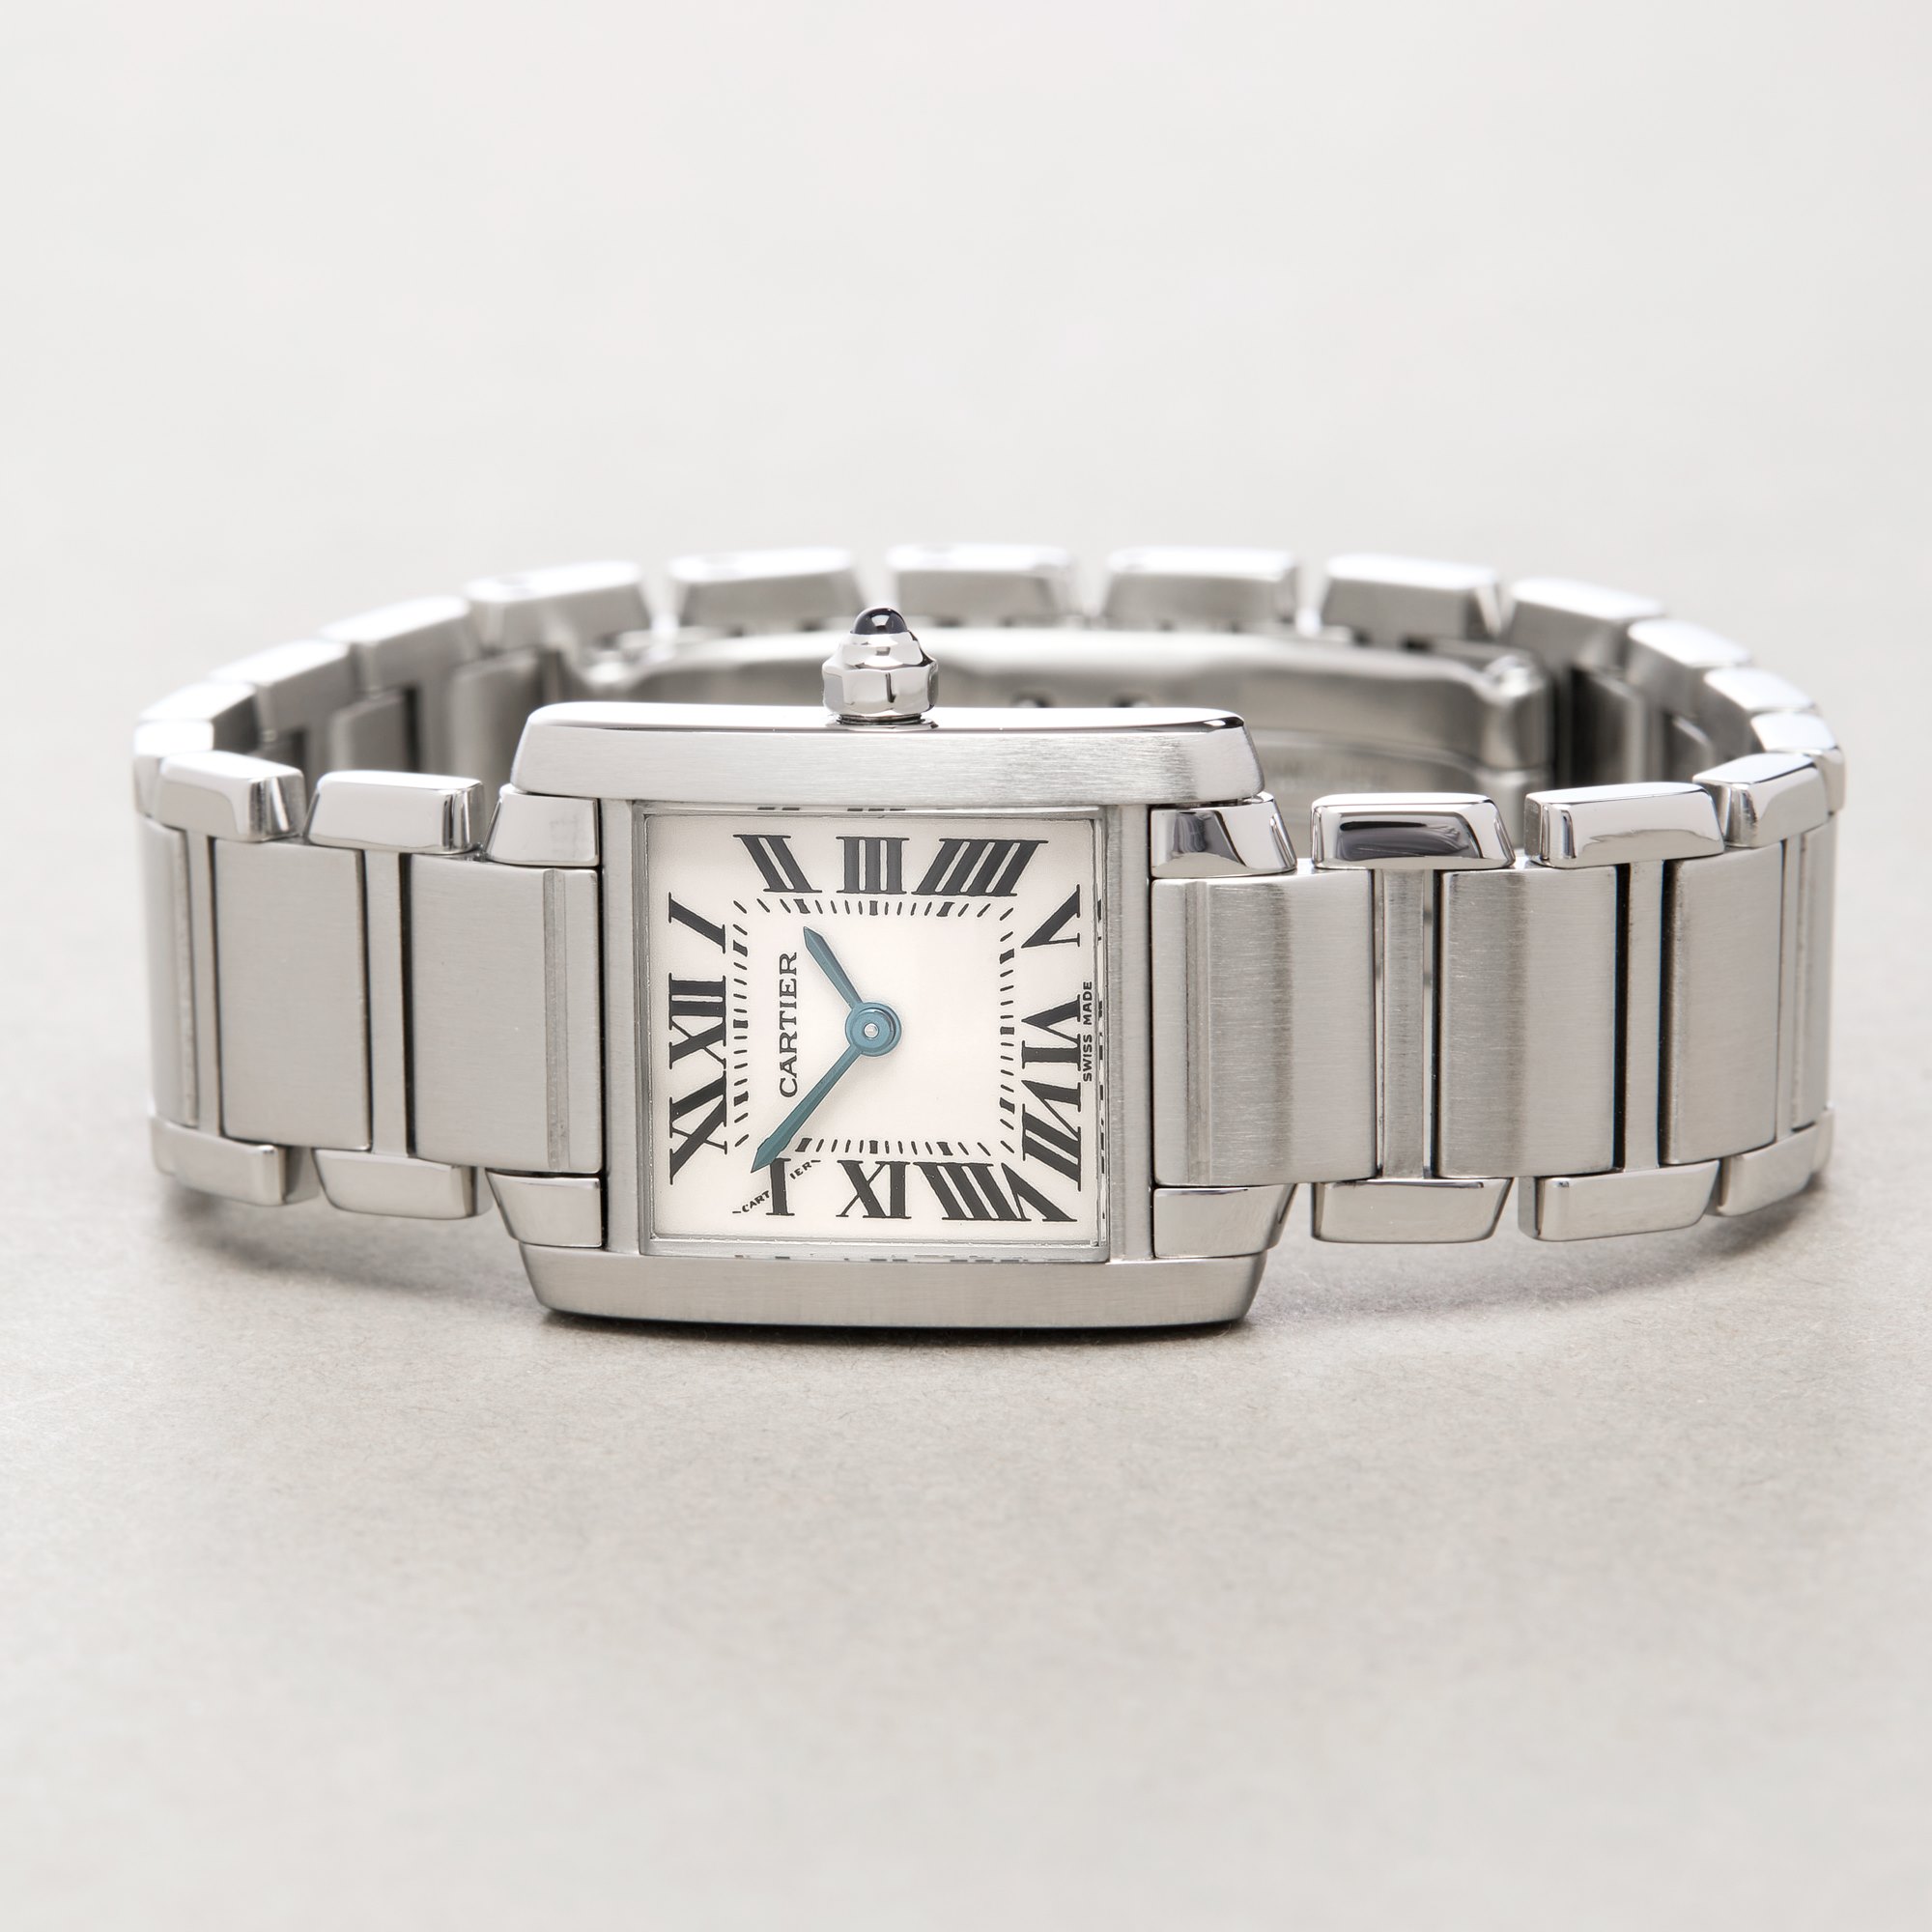 Cartier Tank Francaise Stainless Steel W51008Q3 or 2384